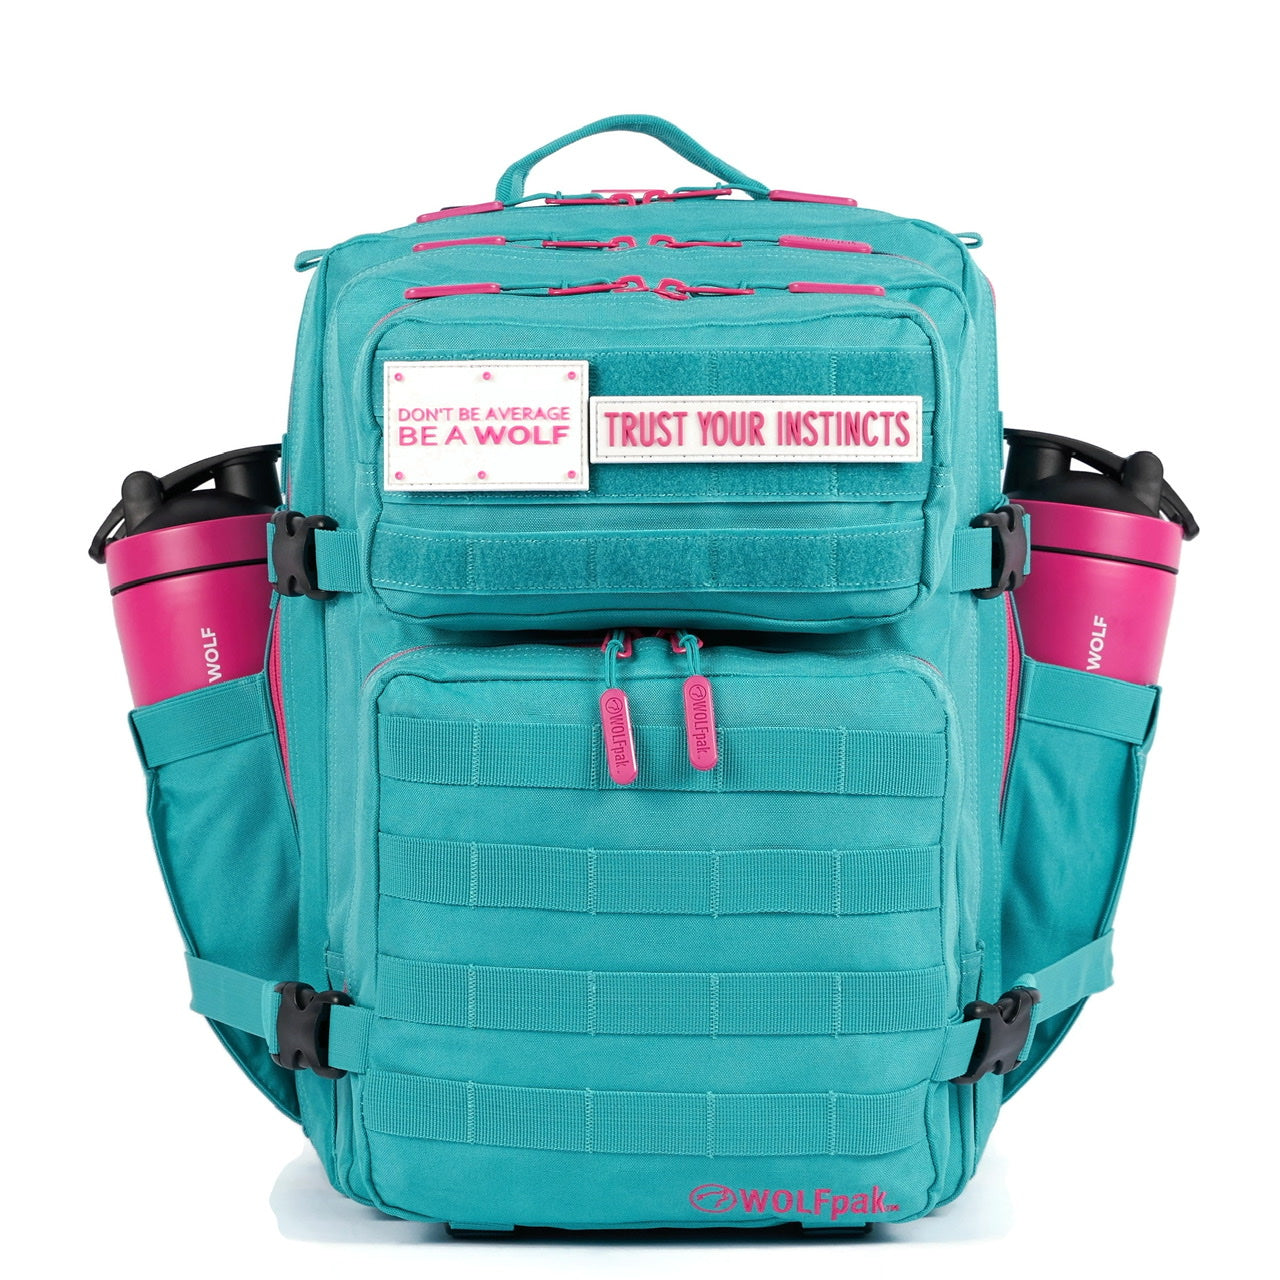 35L Backpack Miami Vice